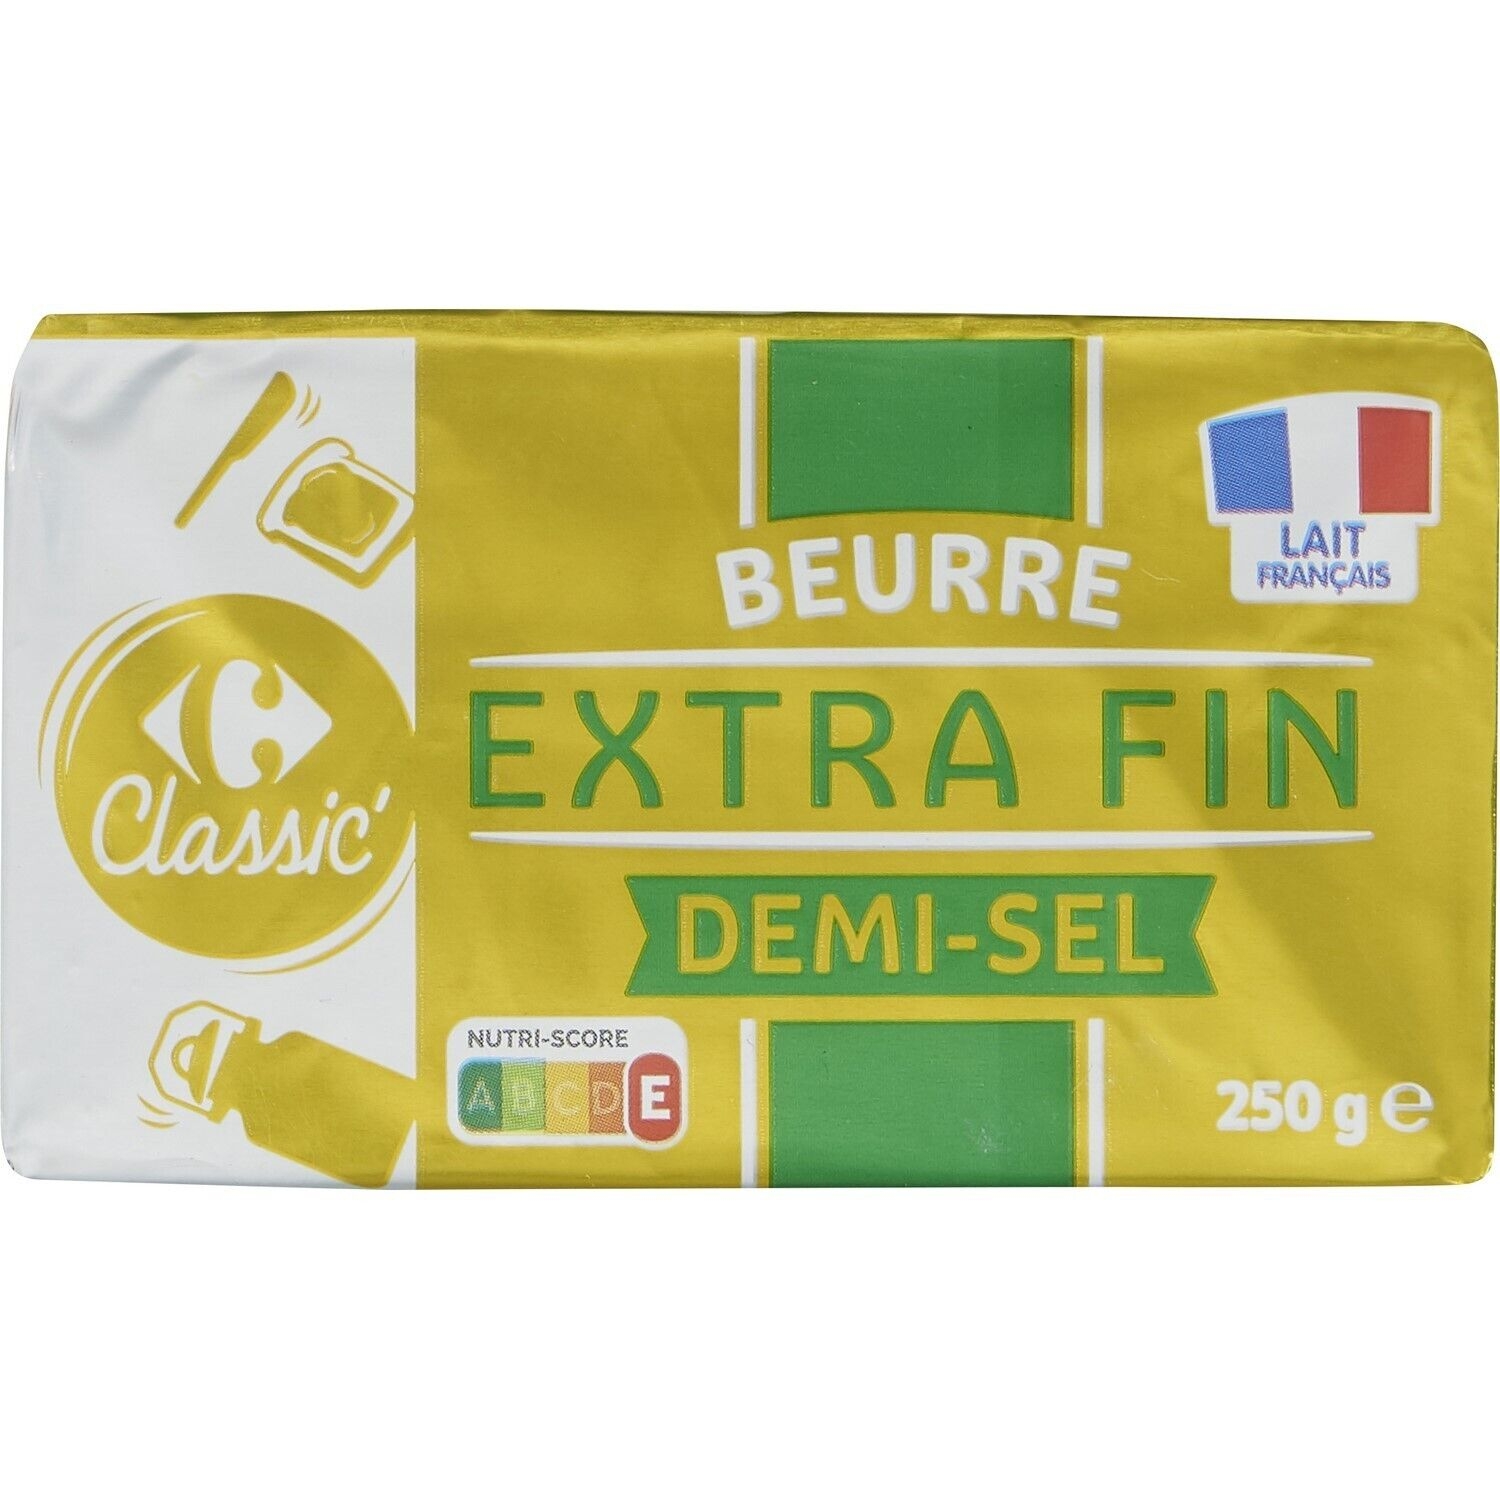 Beurre extra fin demi-sel CARREFOUR CLASSIC